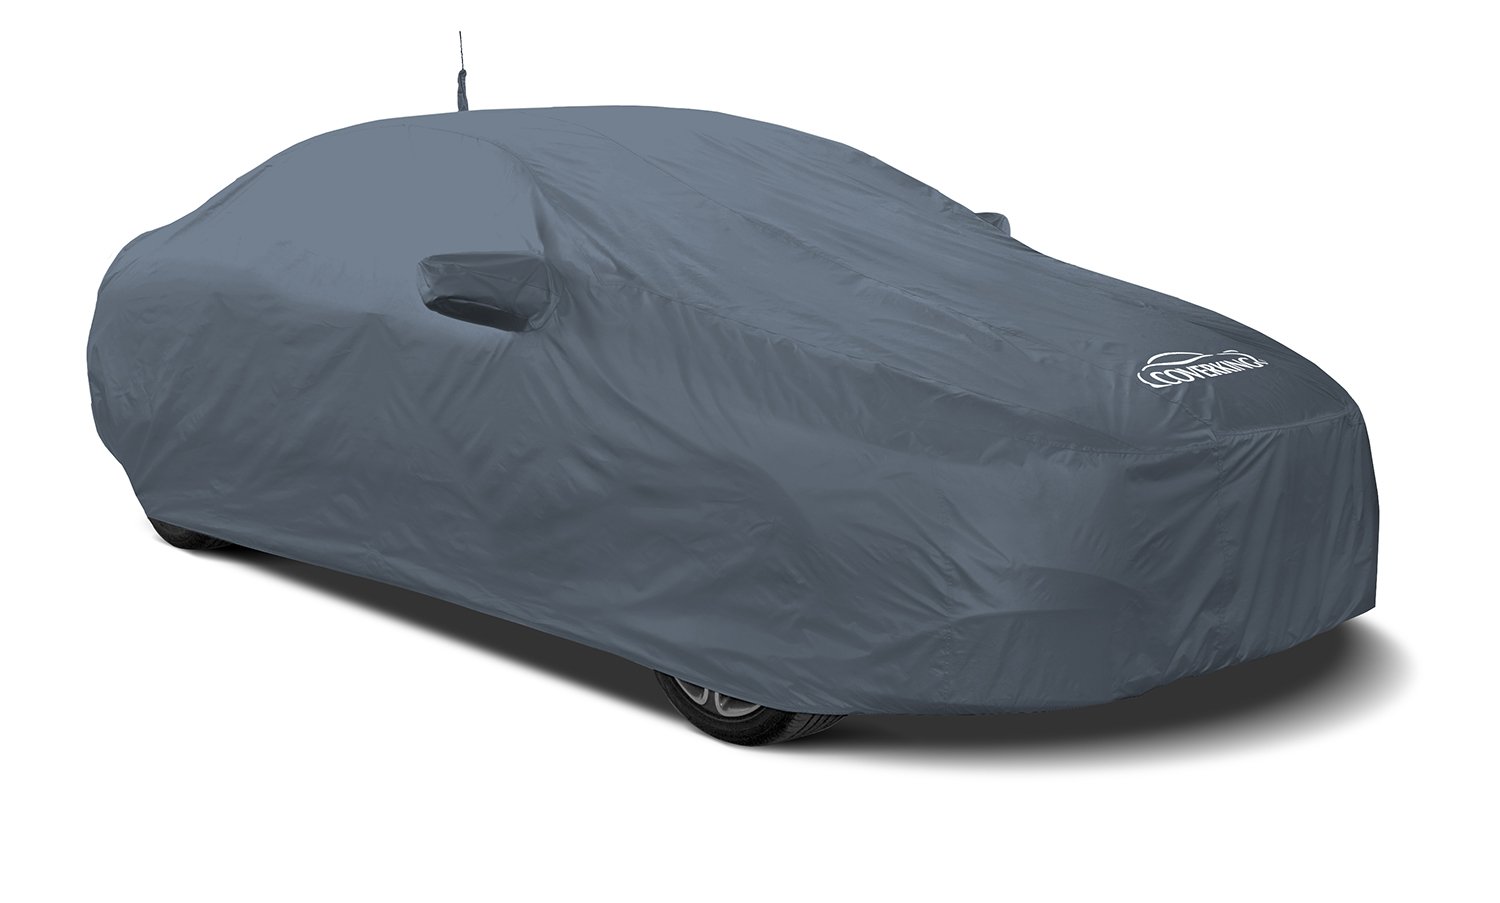 2005-2014 Ford Mustang CoverKing Stormproof Car Cover